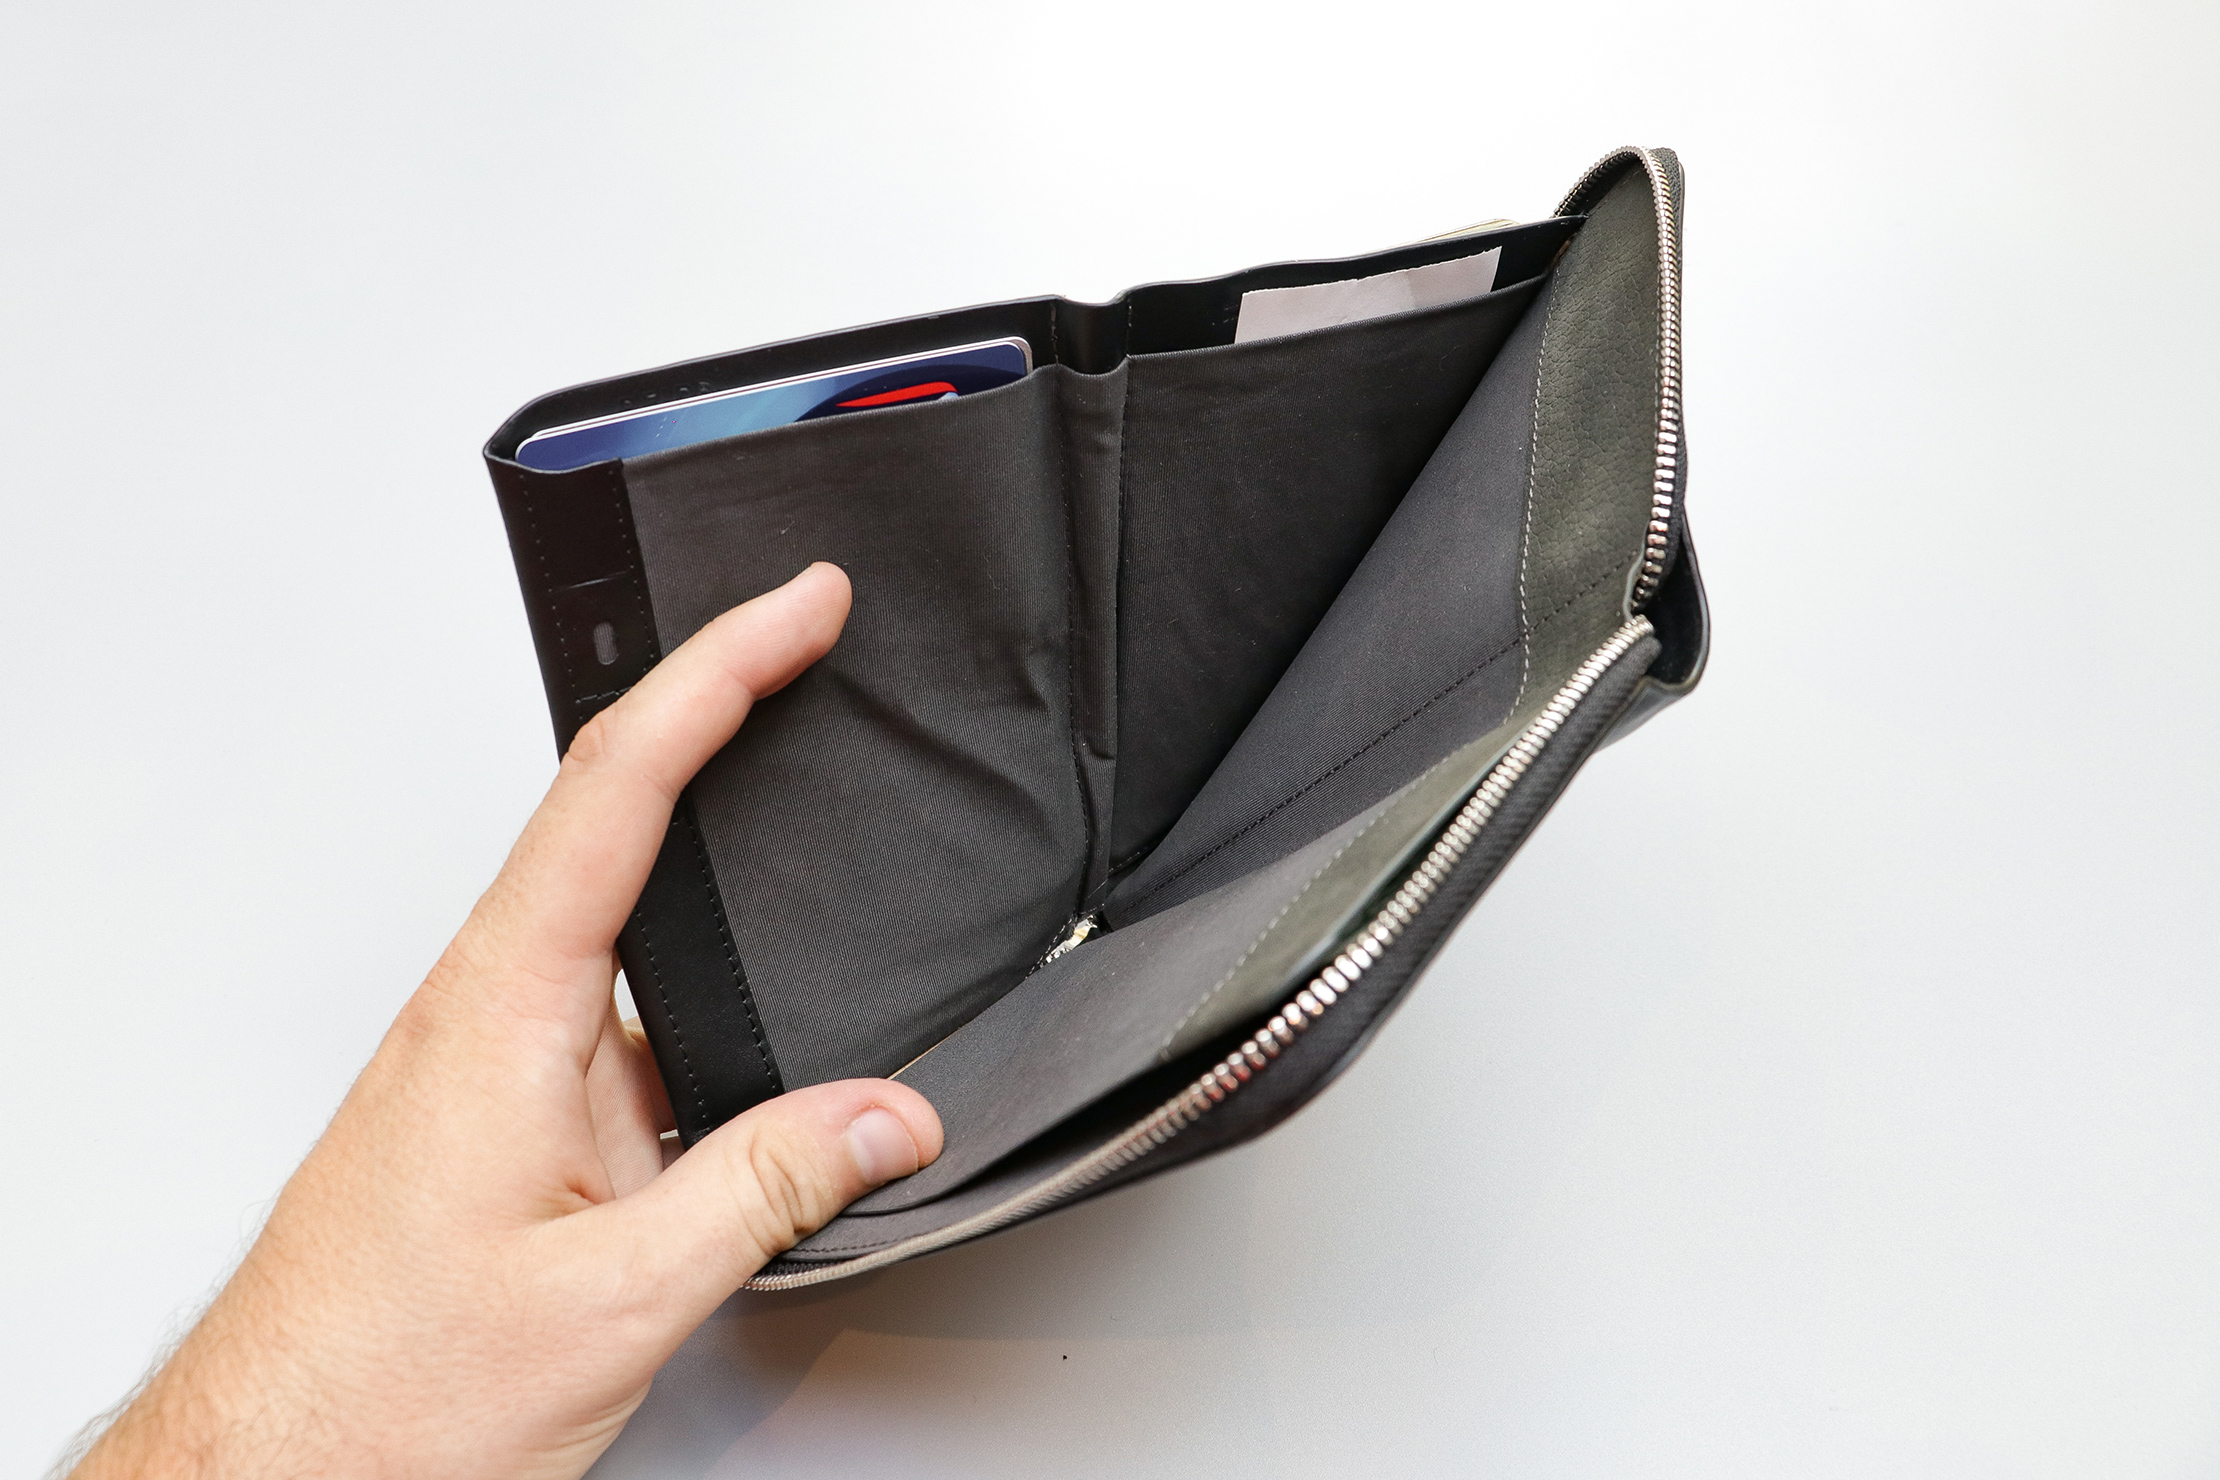 Bellroy Travel Folio Card And Boarding Pass Holder Behind The Front Pockets